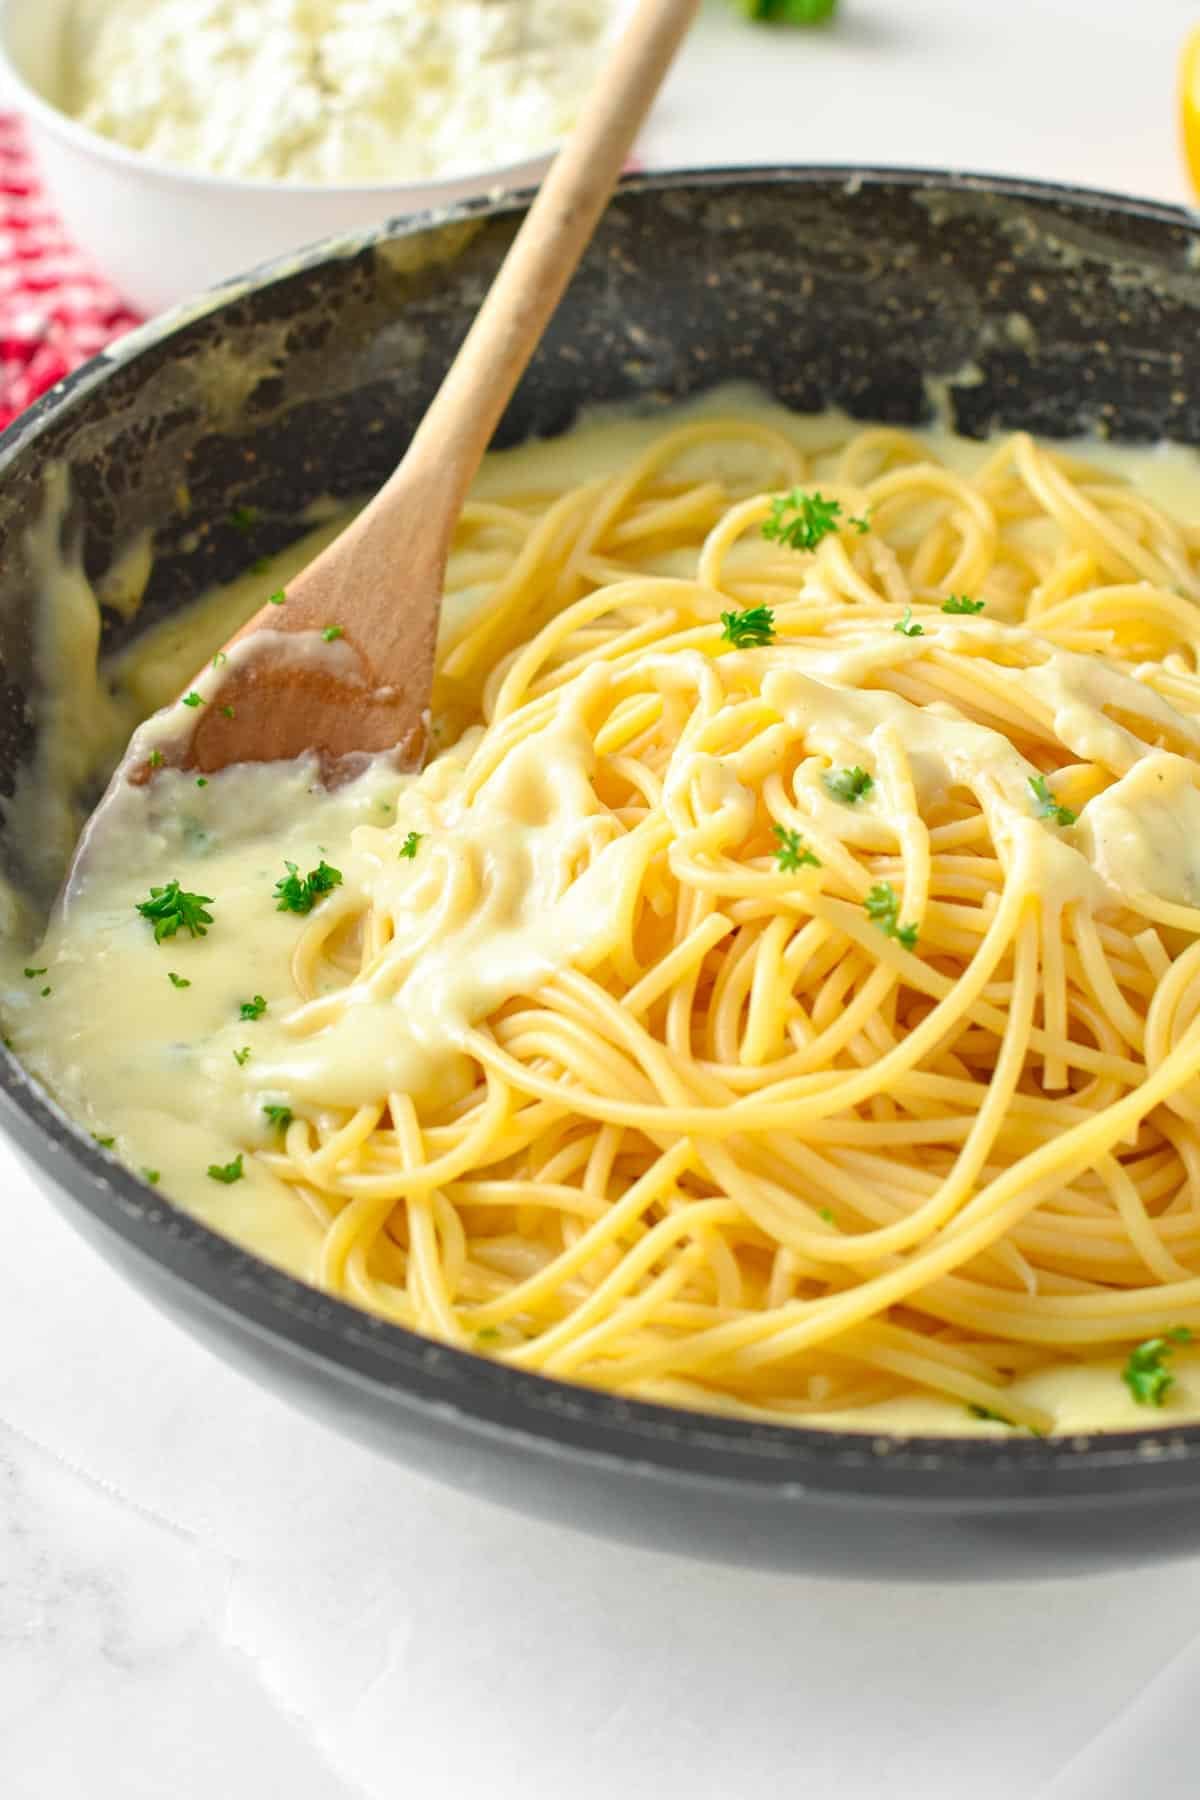 This Cottage Cheese Pasta Sauce is the most delicious creamy protein pasta sauce packed with 17 g of proteins per serve. If you love Alfredo sauce, this healthier version hit the spot.